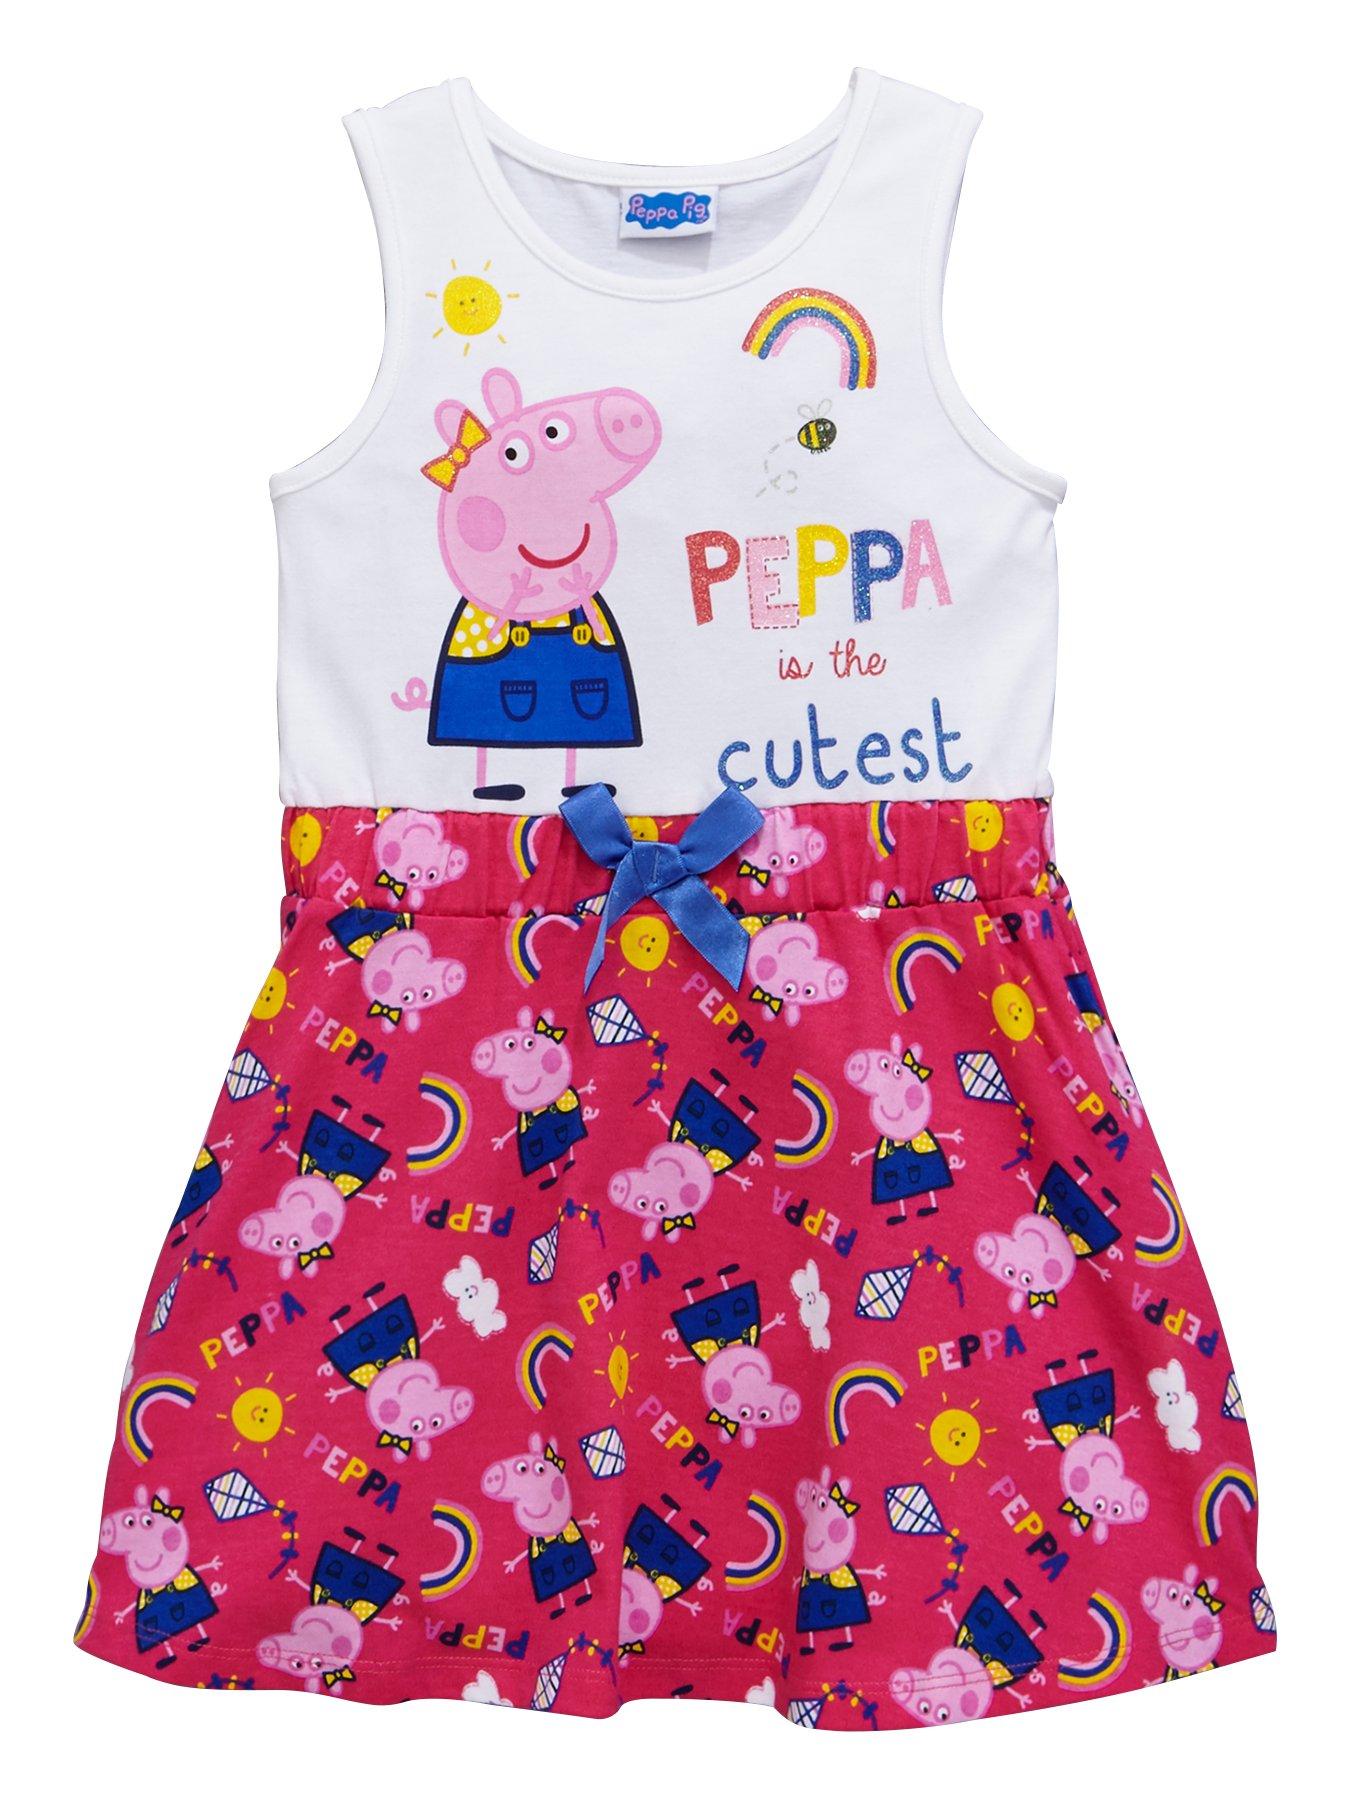 Peppa pig | Girls clothes | Child & baby | www.very.co.uk